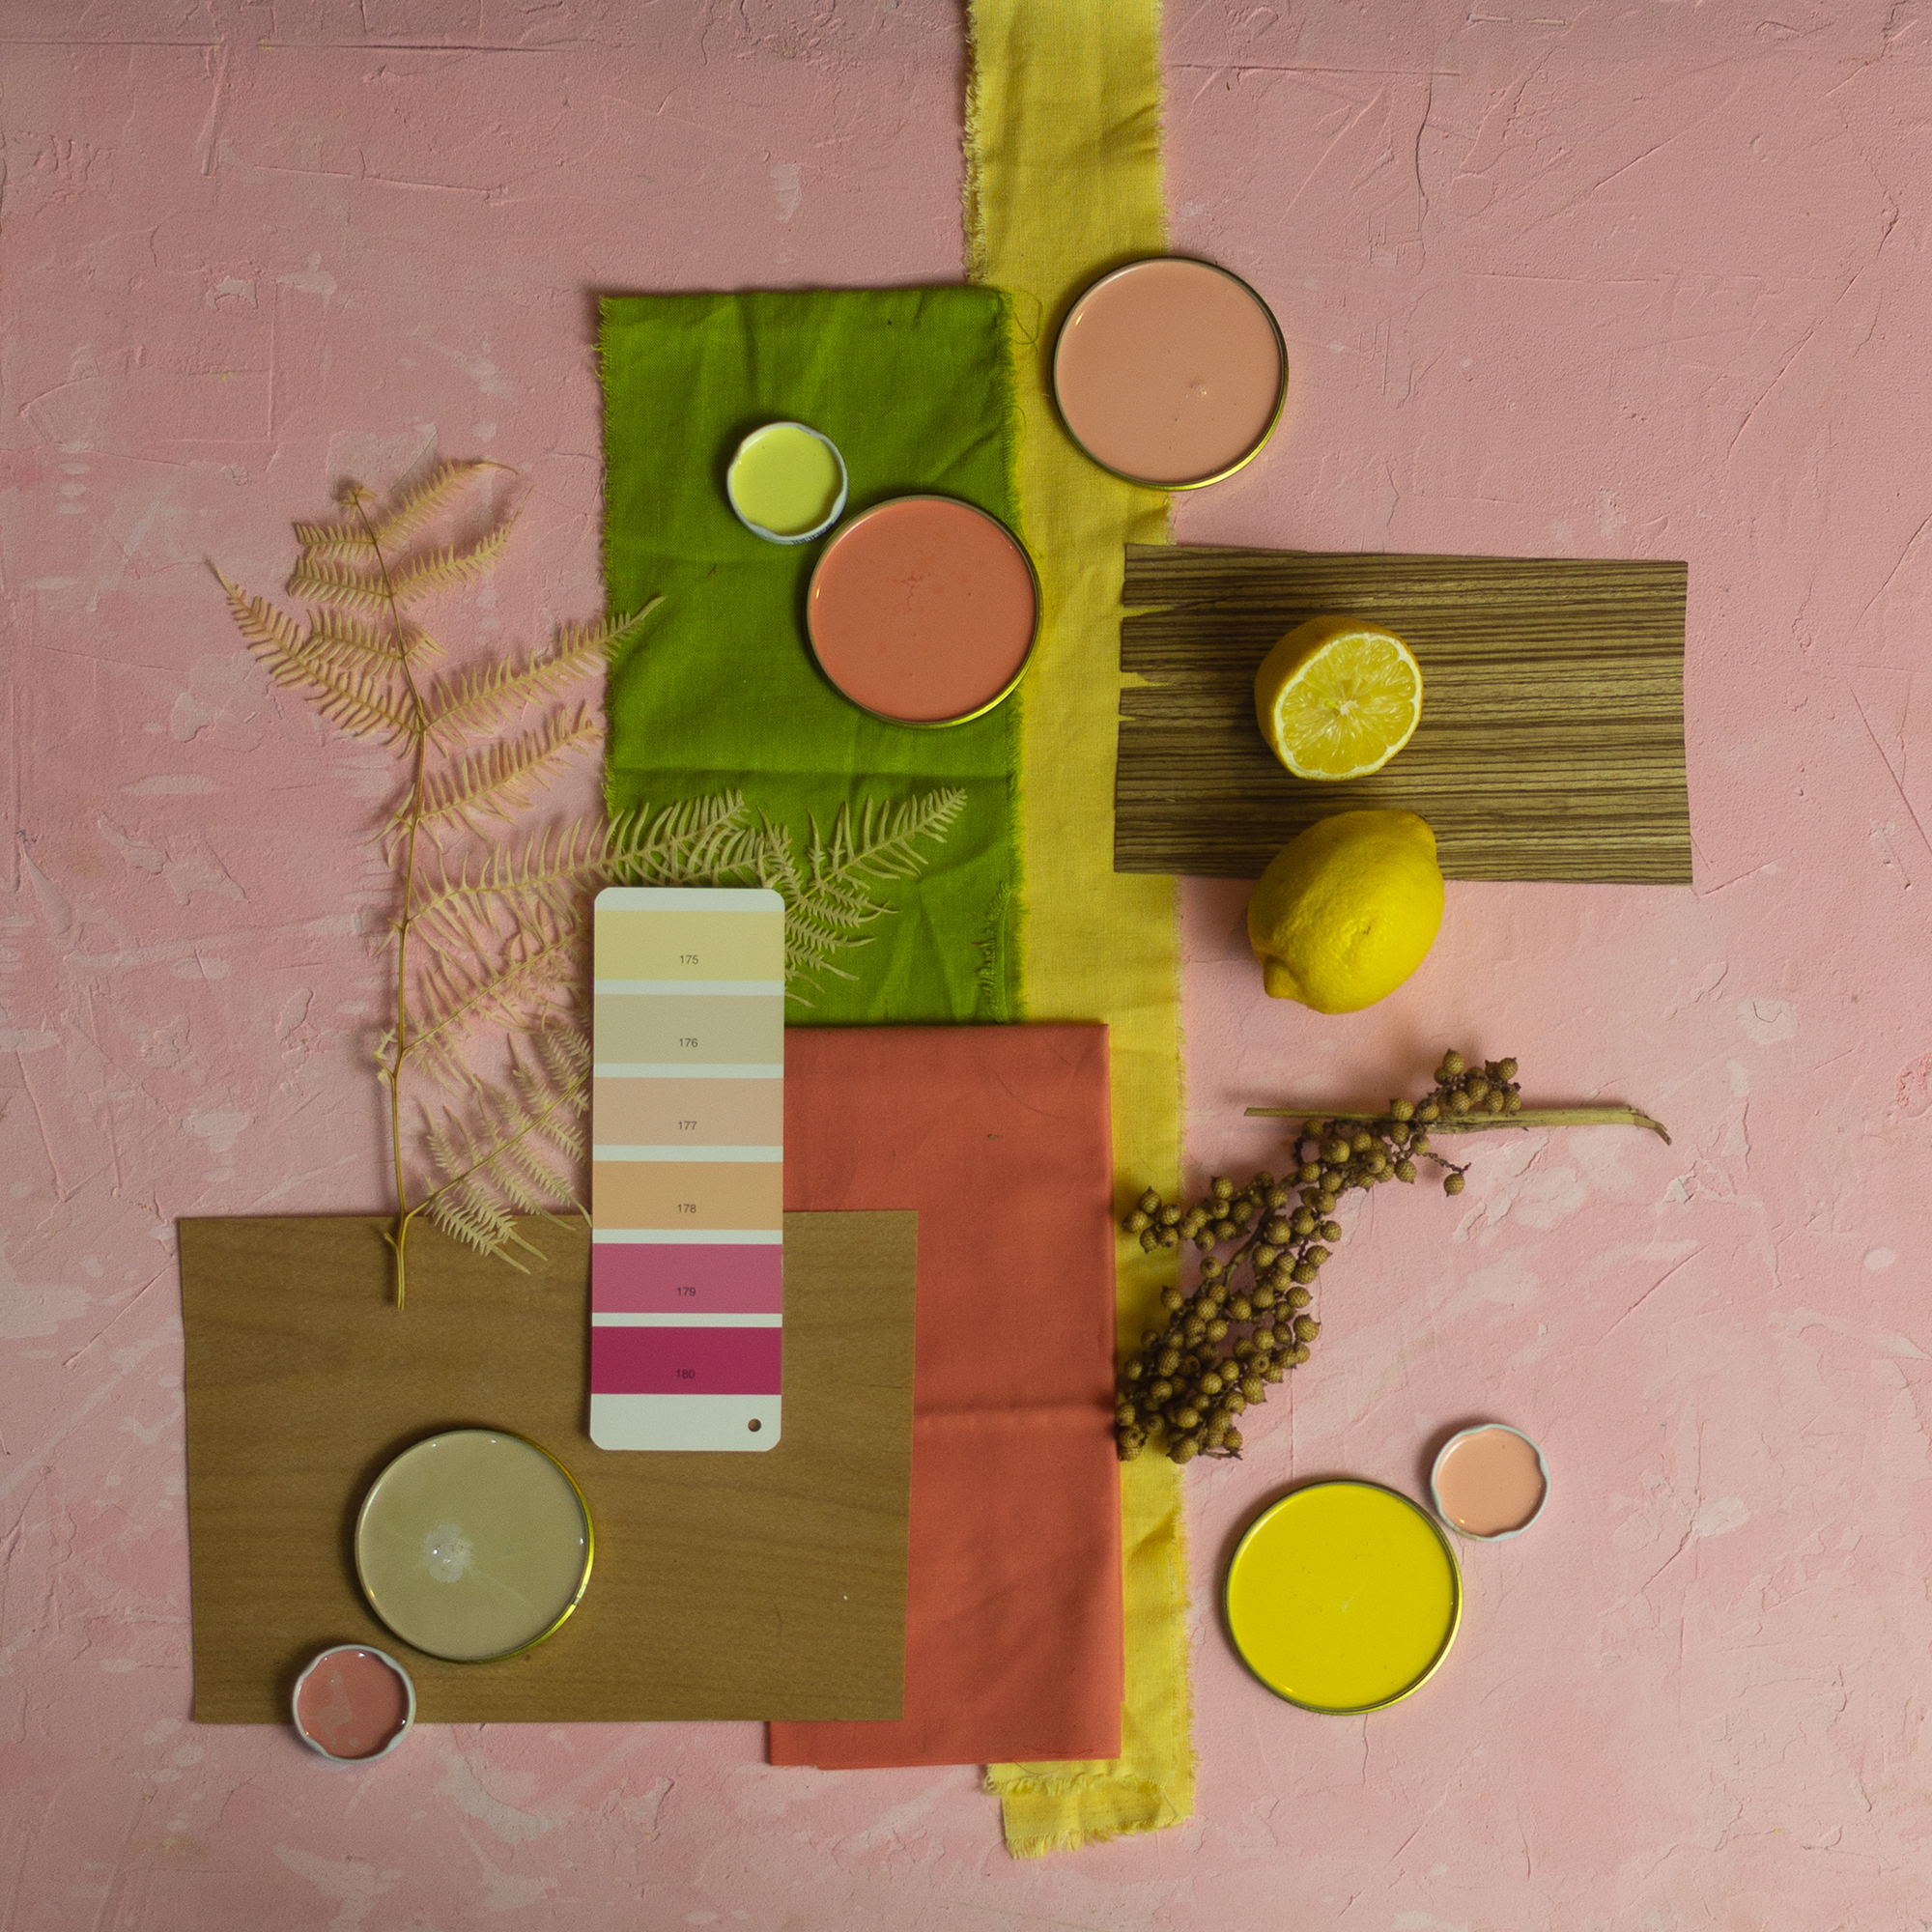 colorful moodboard on pink plaster background with green and yellow fabric and pink and yellow paints along with other accessorize